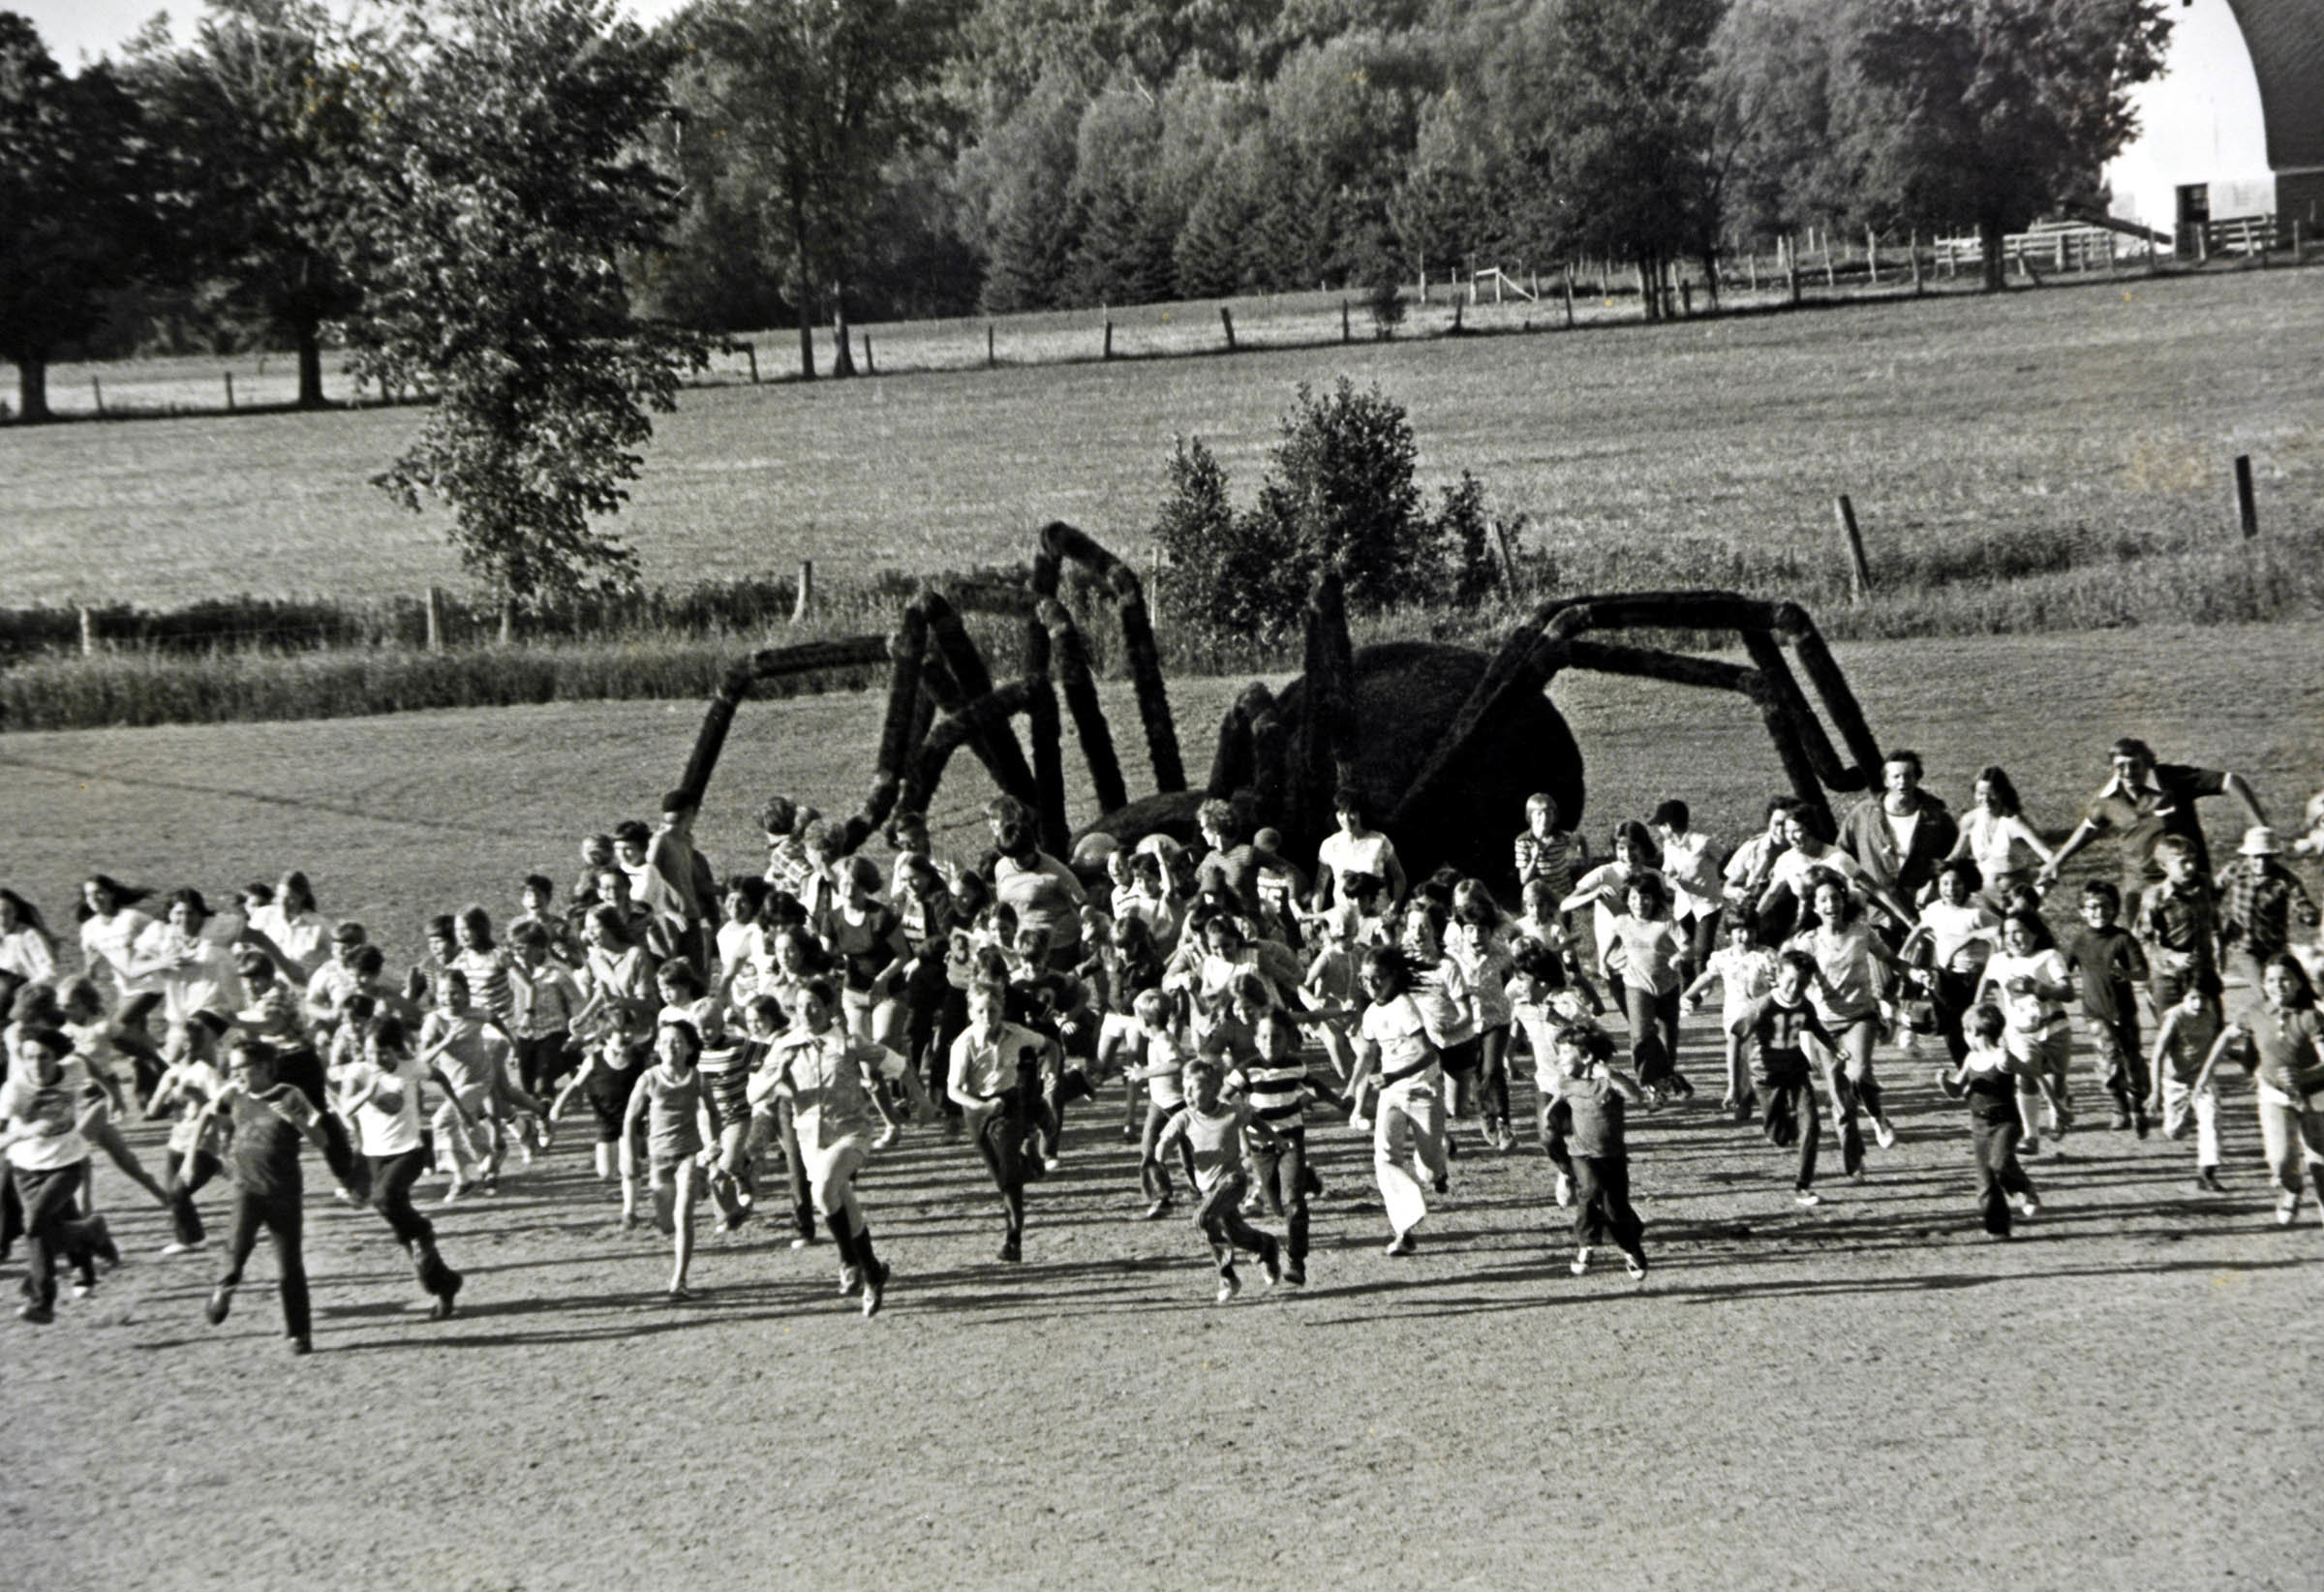 A production shot of The Giant Spider Invasion.